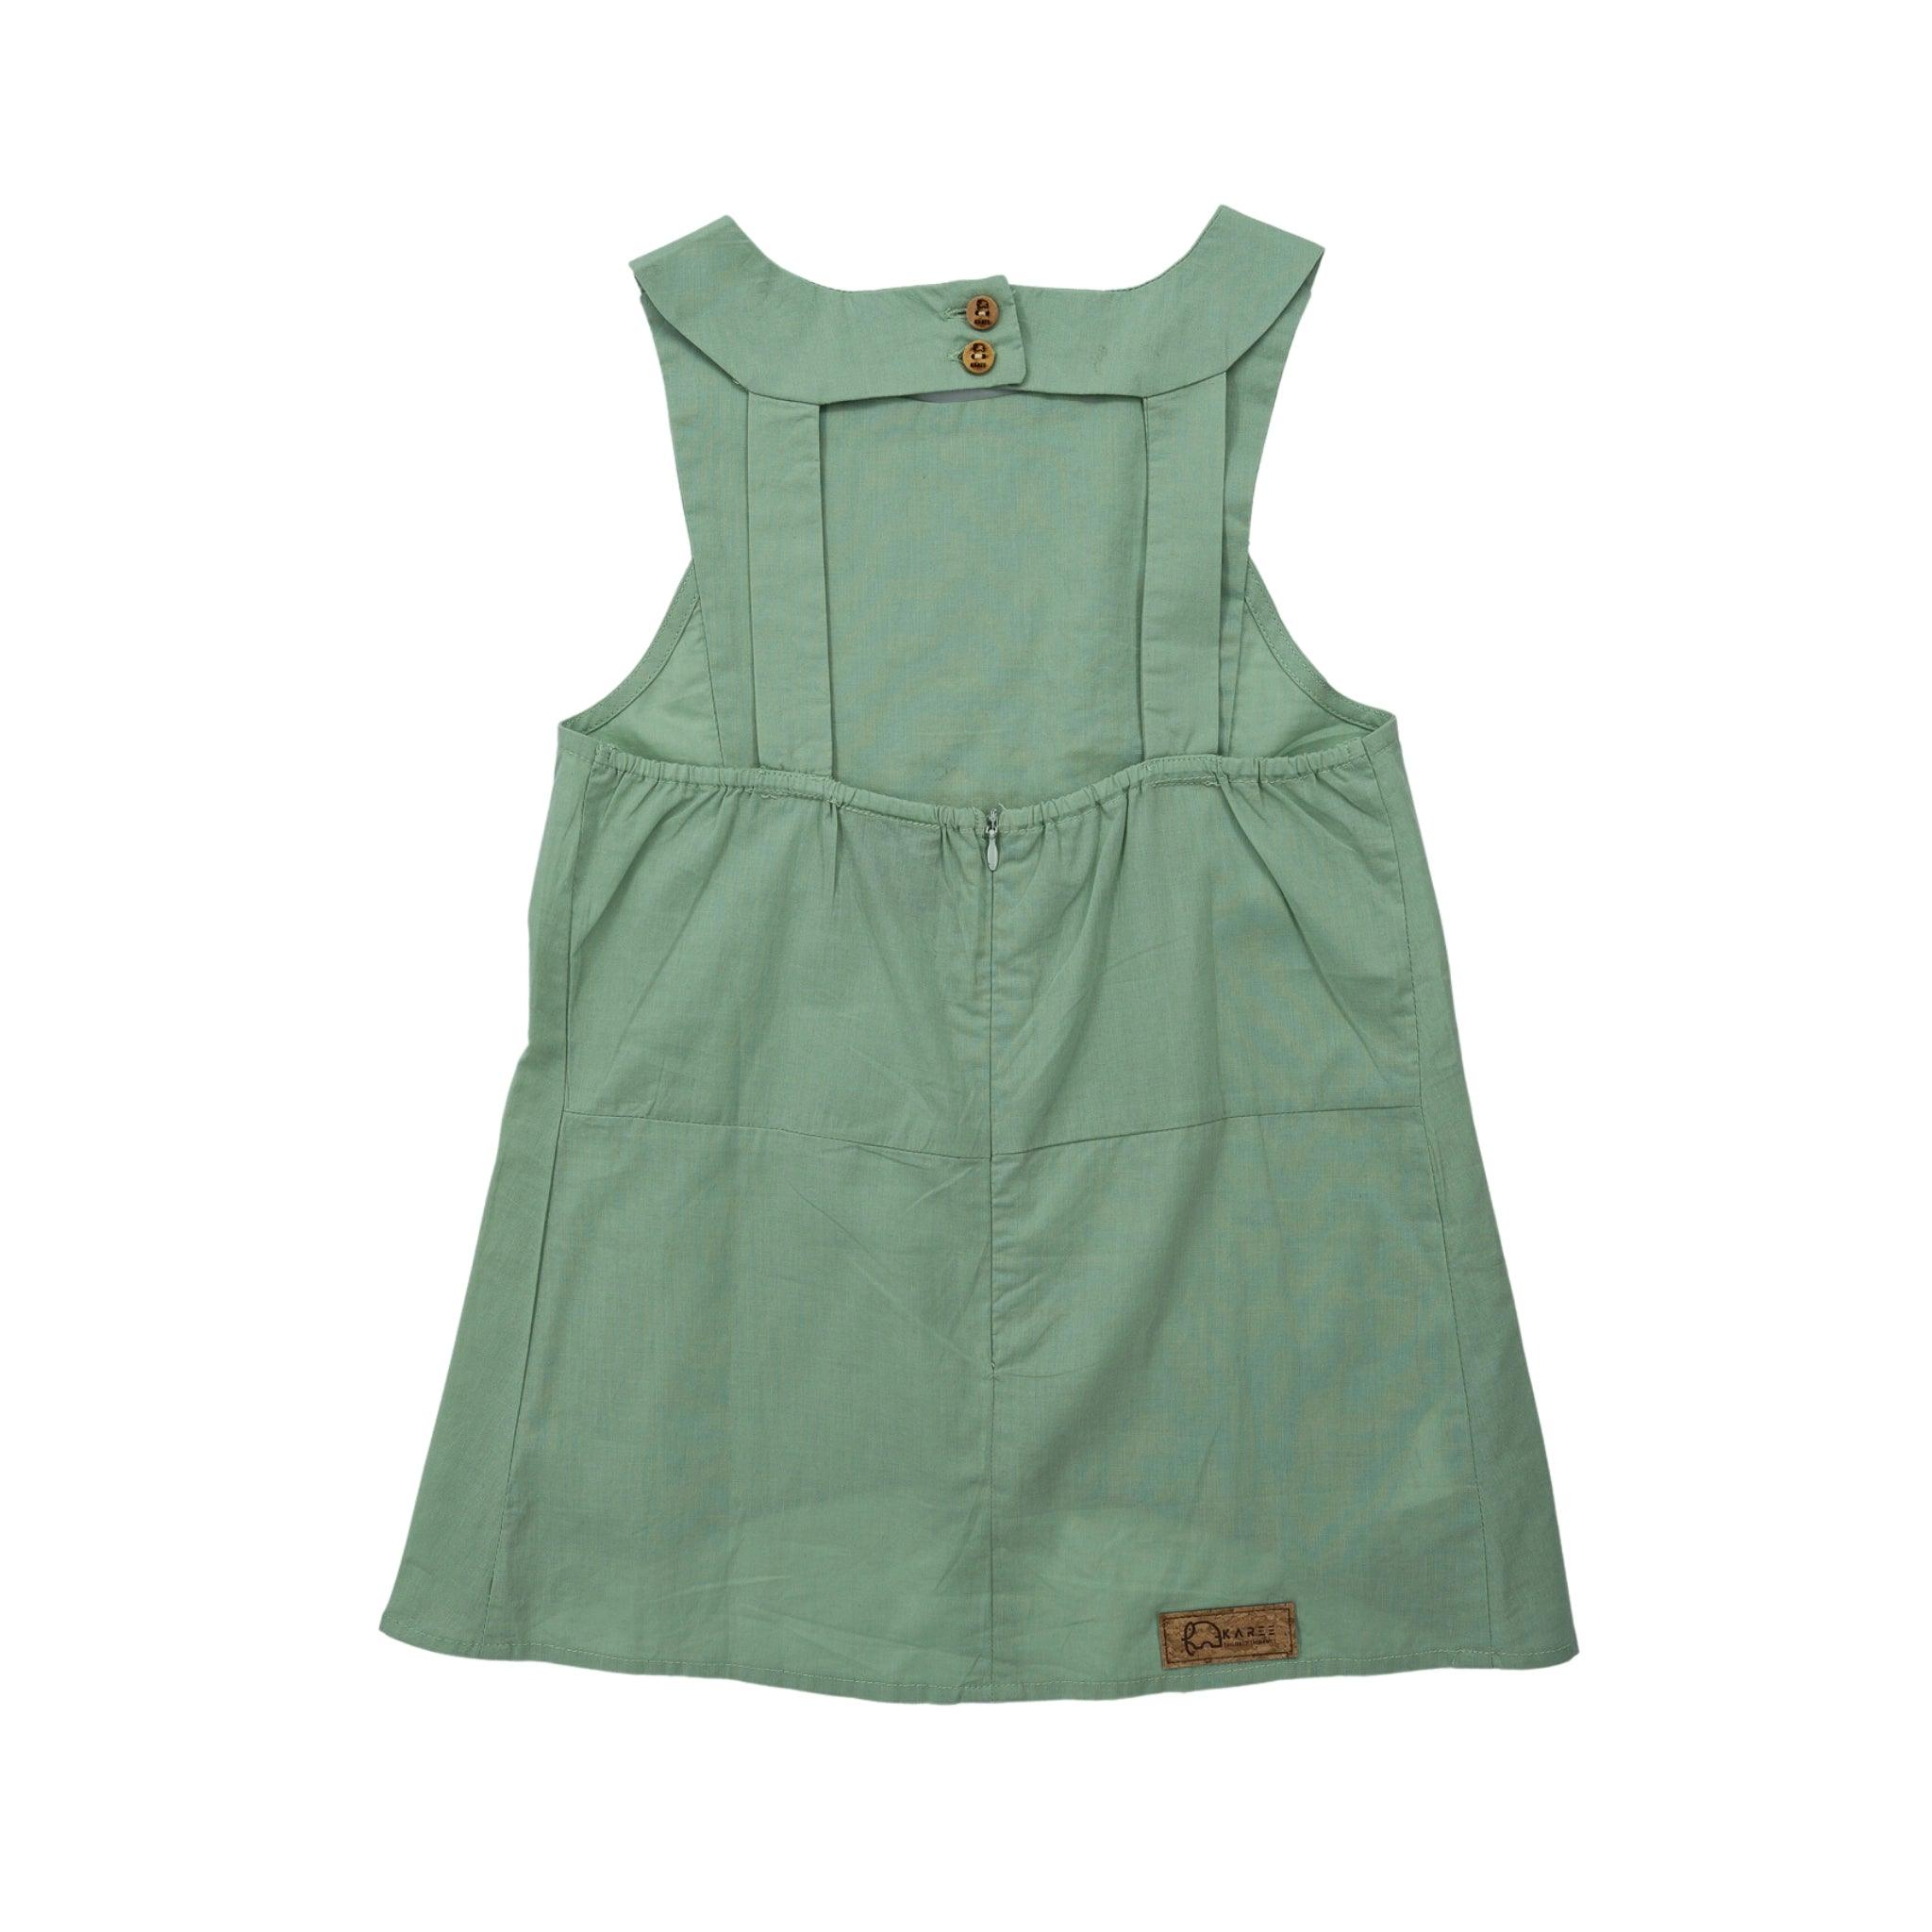 A smoke green breathable cotton bib neck top for kids with a button at the back and a brand tag on the front bottom left by Karee.